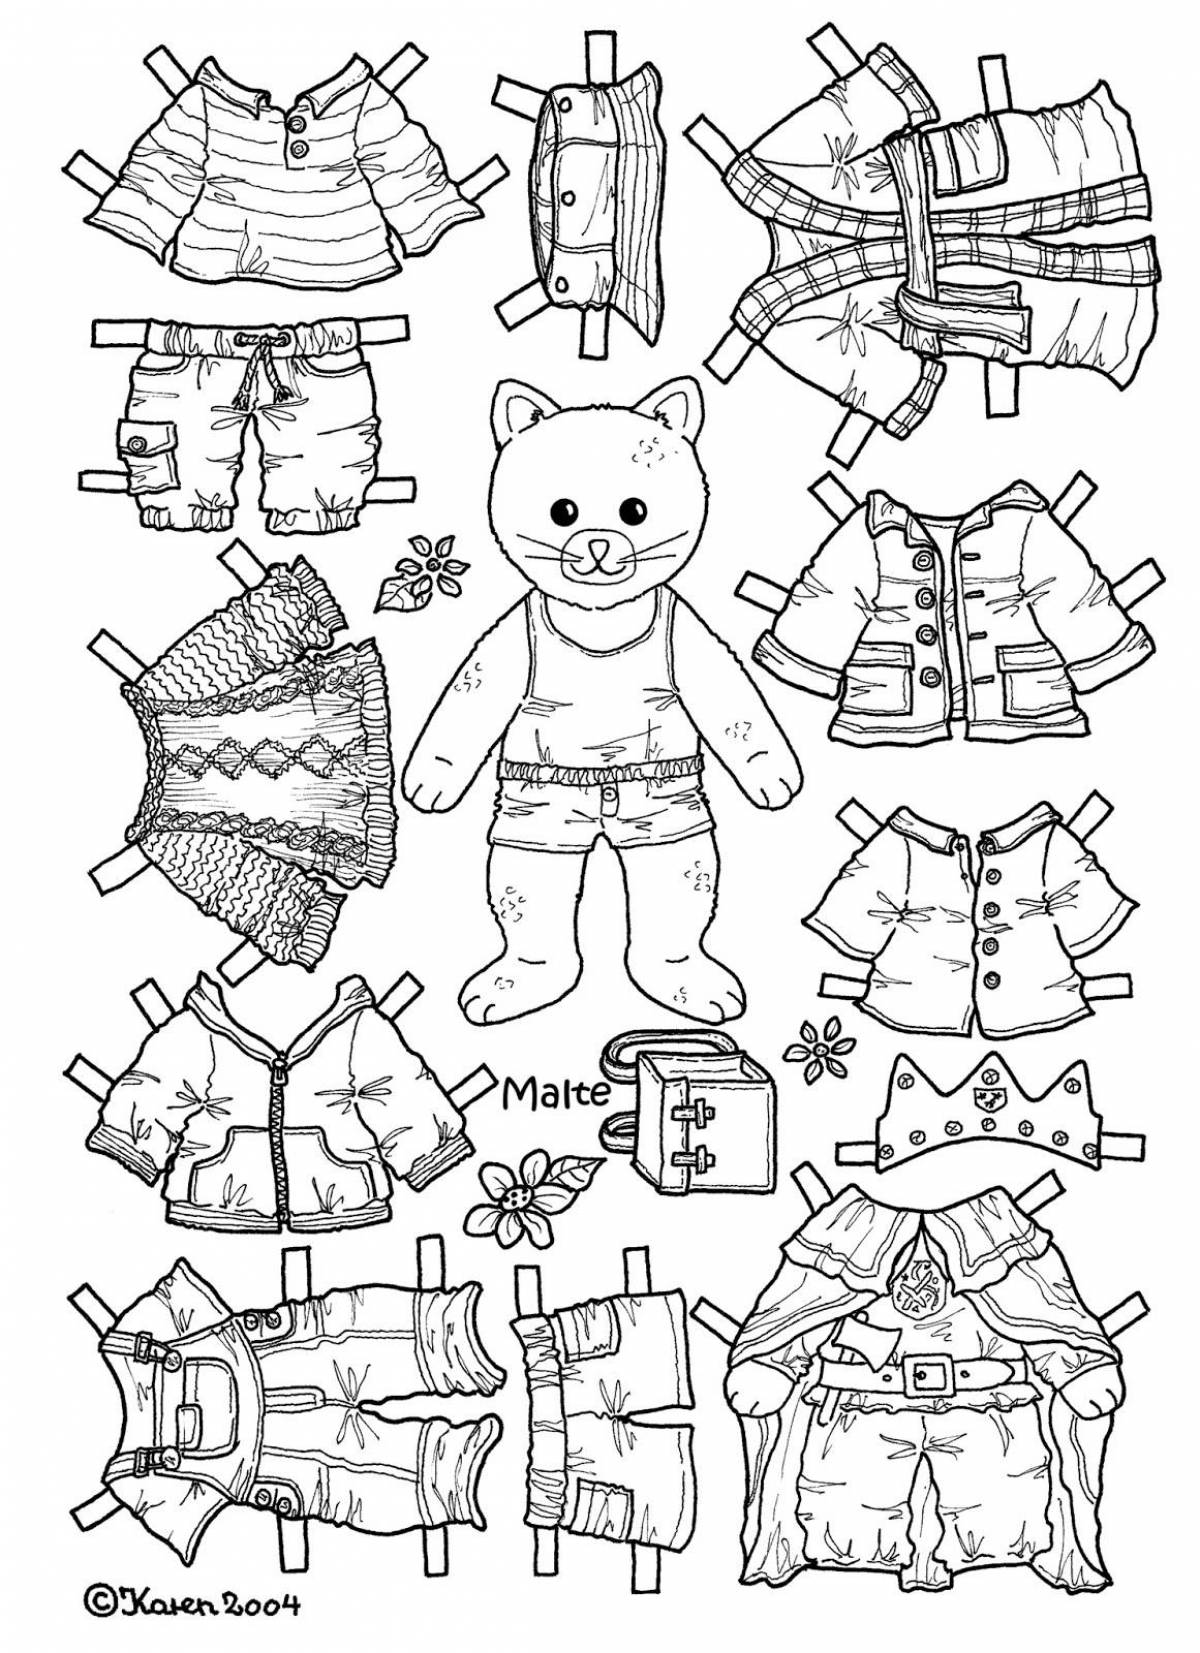 Cute lalafanfan coloring book with clothes